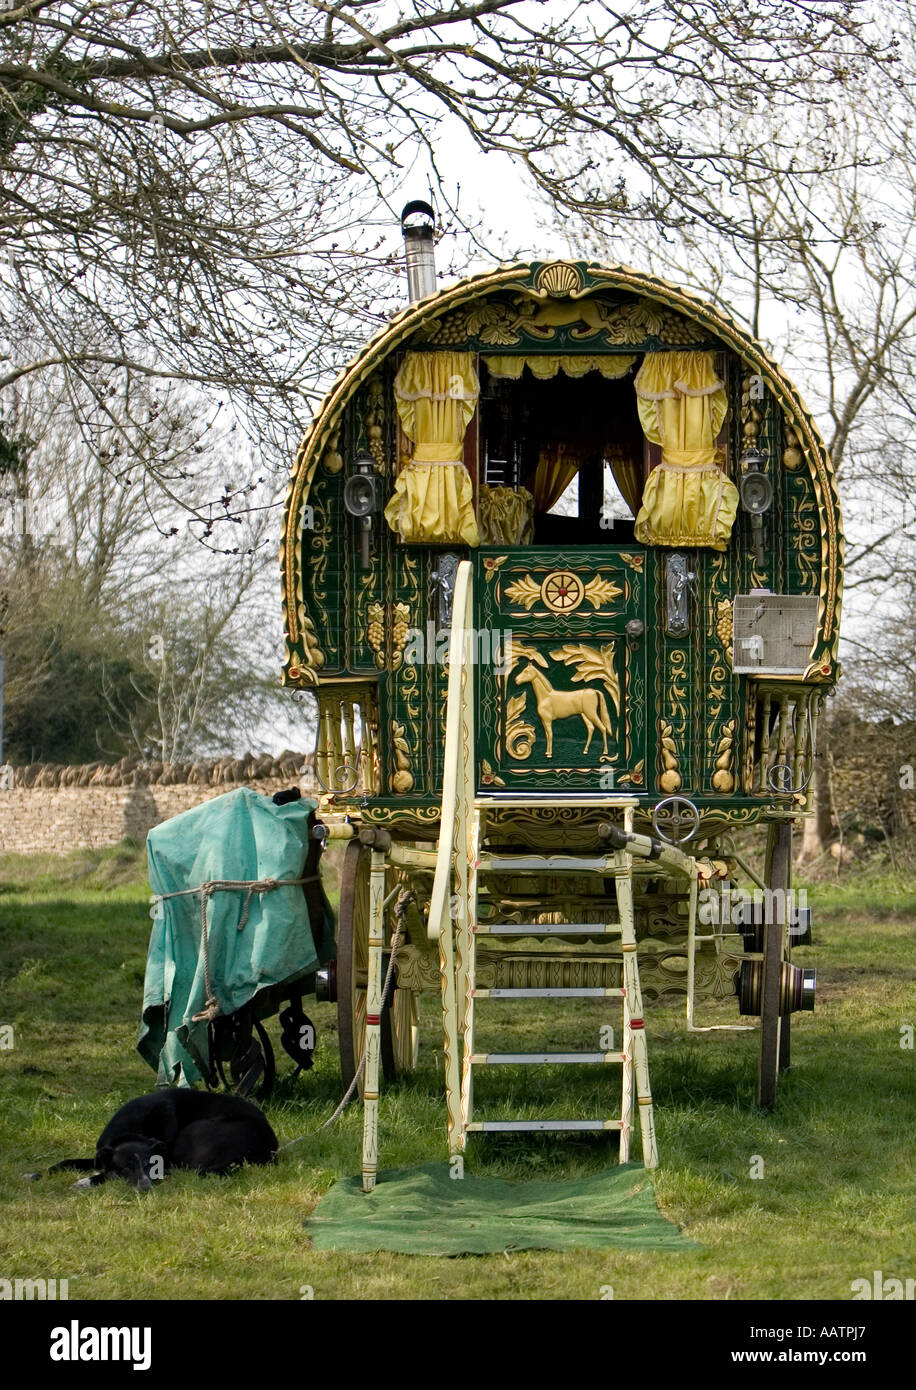 Front view of a gypsy caravan. Stow-on-the-Wold, Cotswolds, Gloucestershire, England Stock Photo